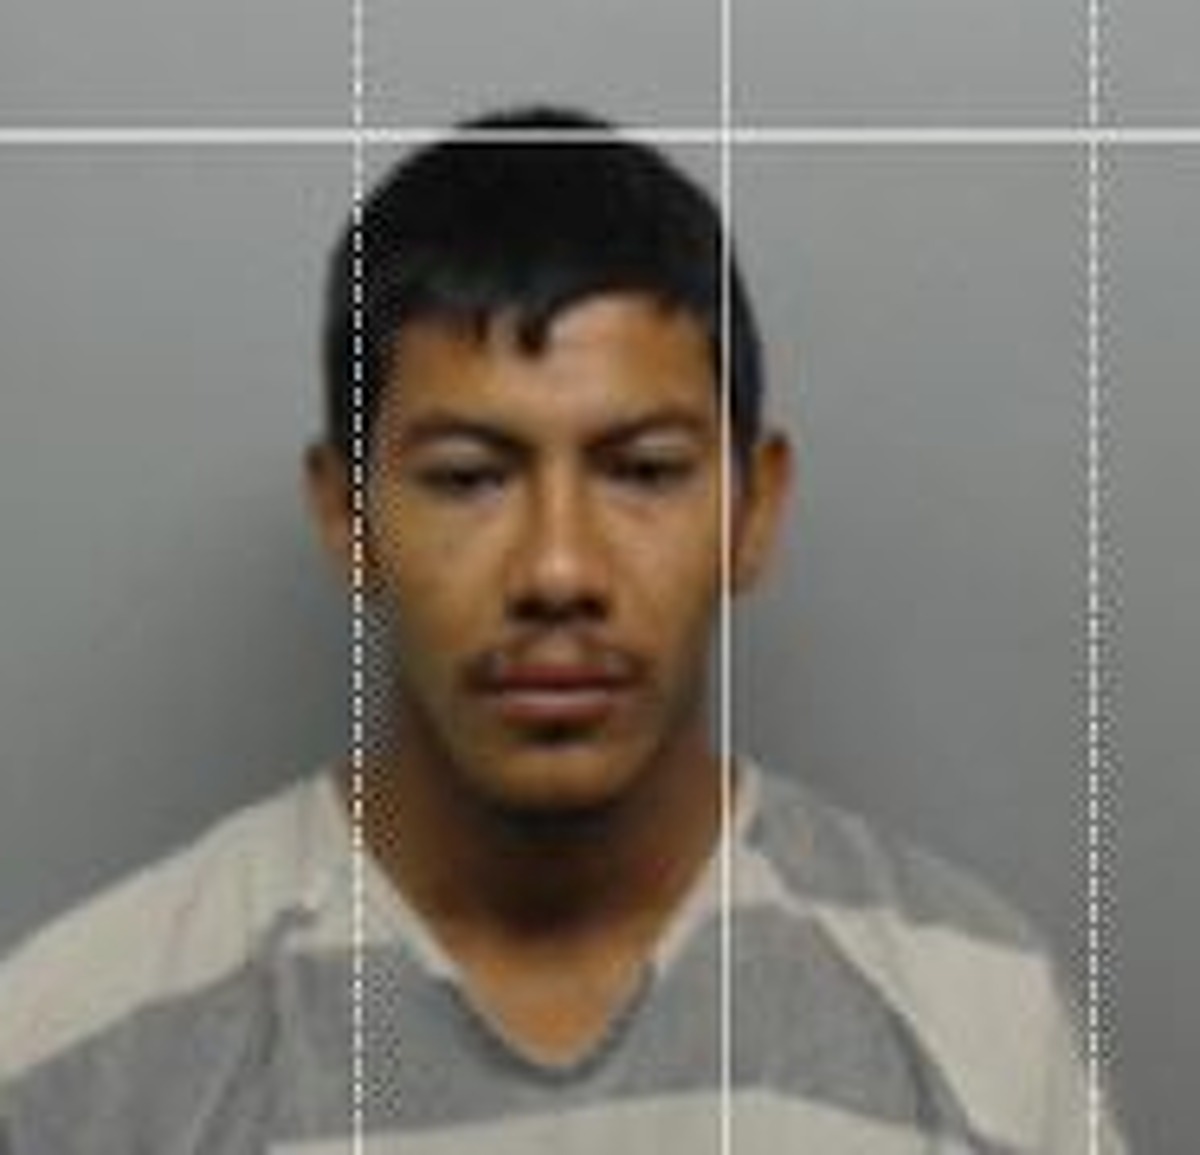 Edas Alonso Lopez-Castillo was arrested and charged with abandoning, endangering a child with criminal negligence.